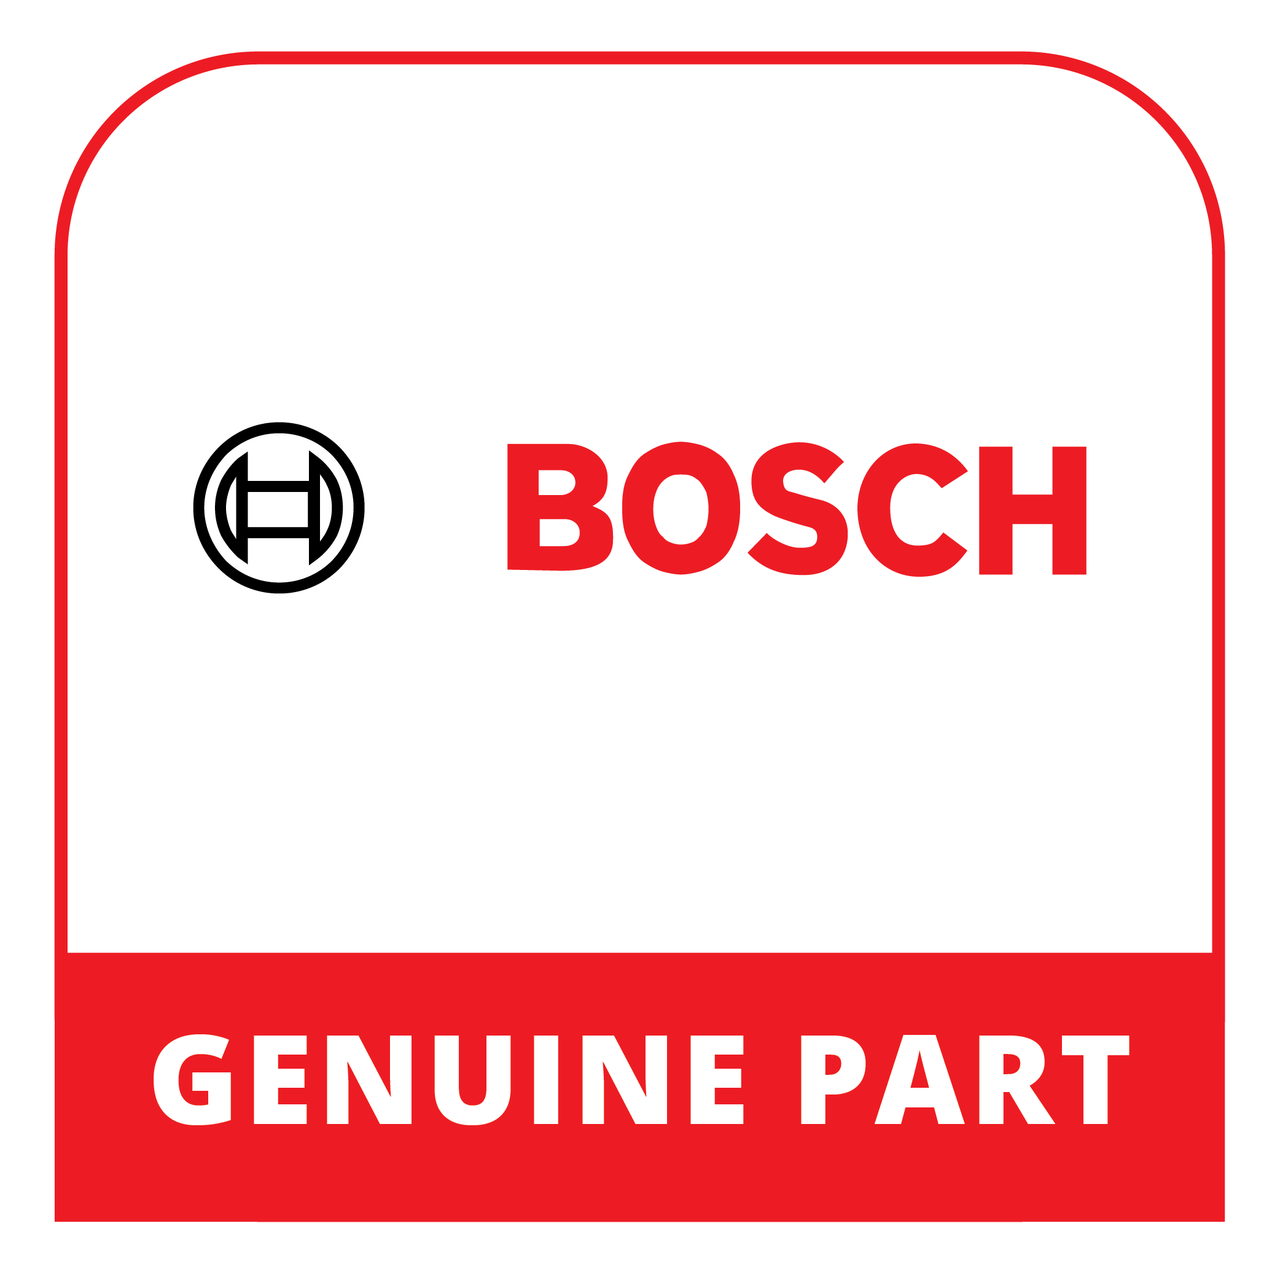 Bosch (Thermador) 18063198 - Instruction Manual - Genuine Bosch (Thermador) Part